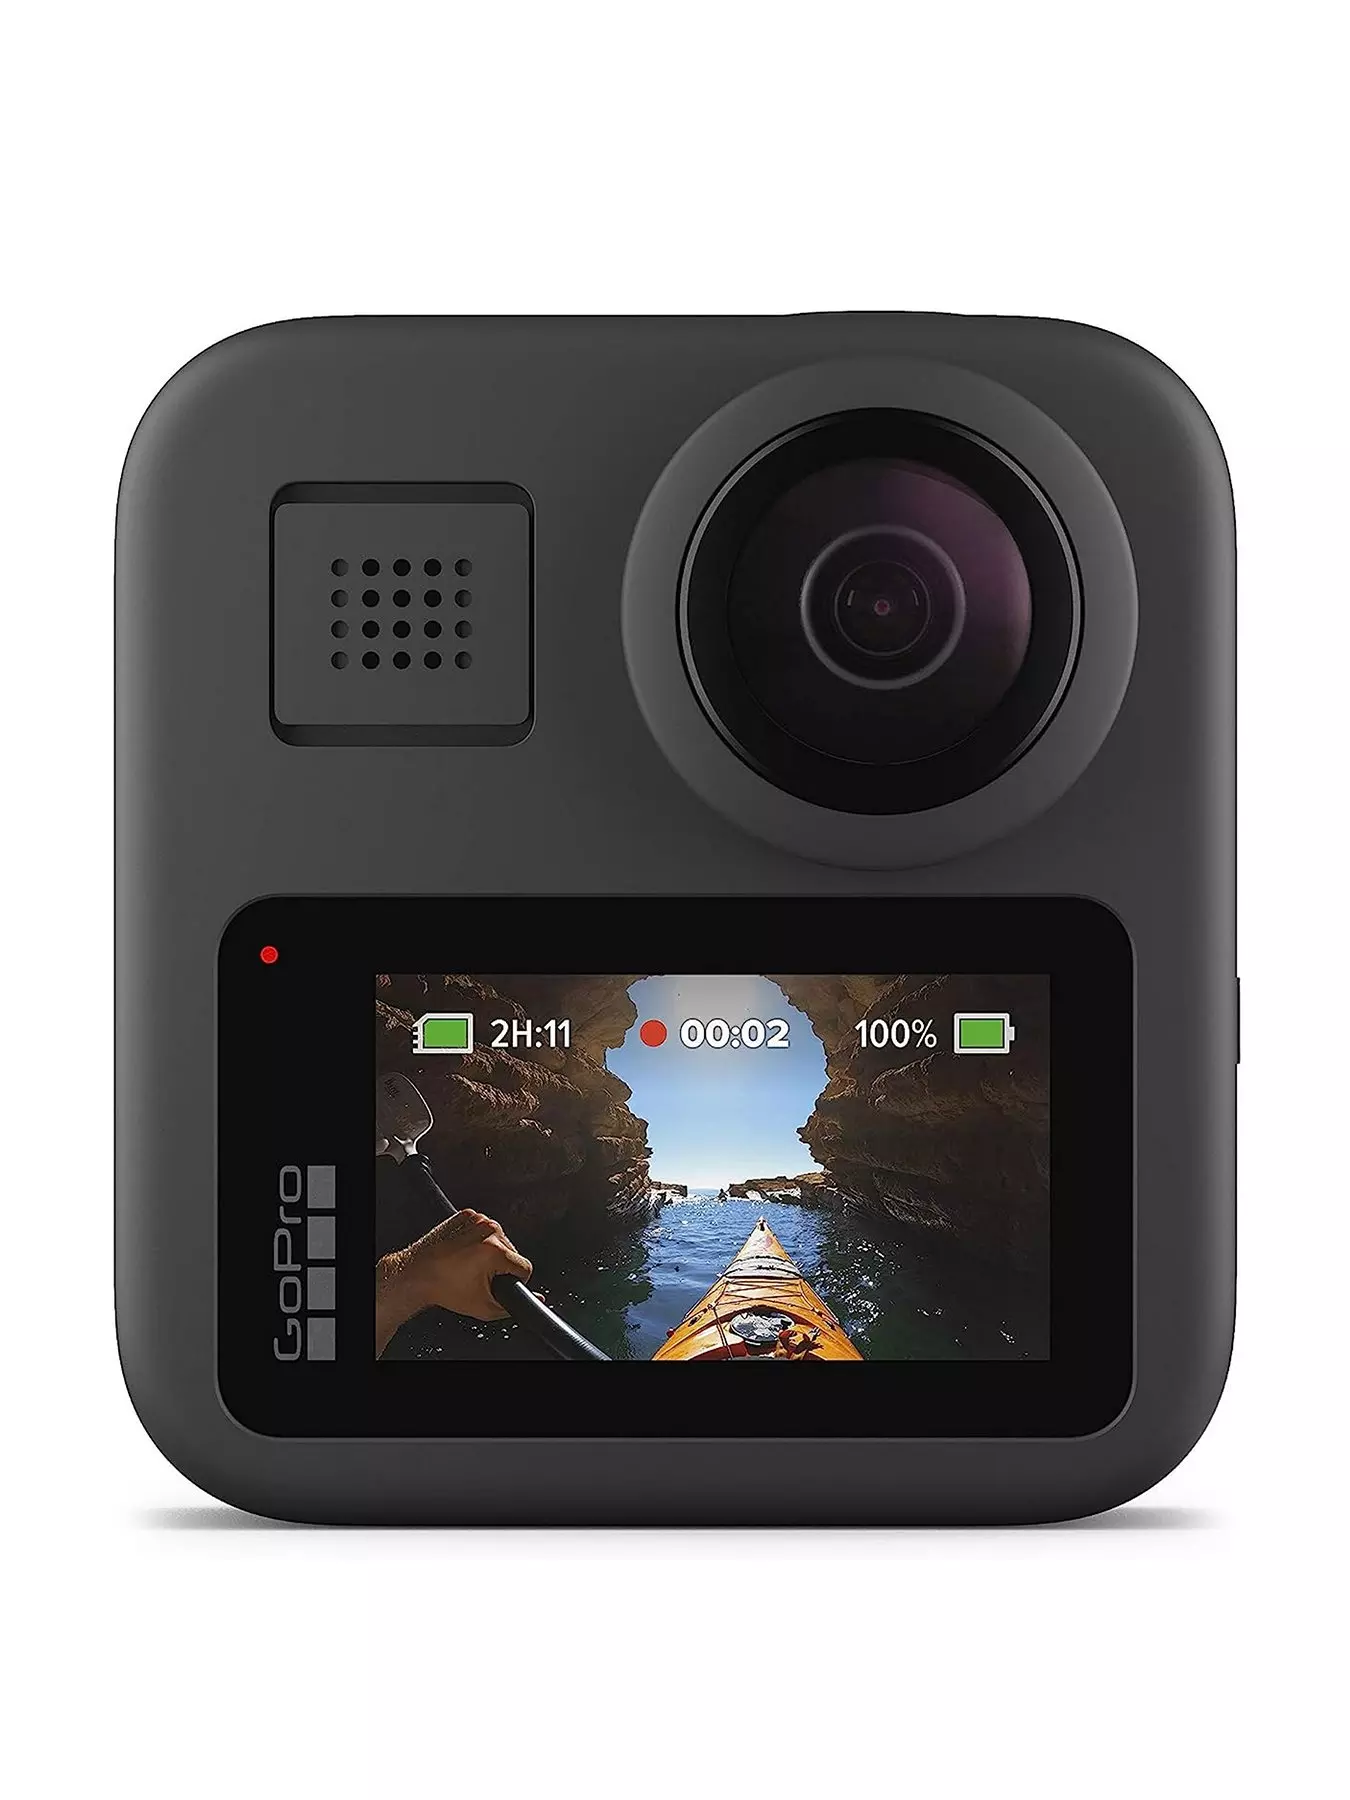 GoPro HERO12 Black Action Camera Specifications Reveal A 27MP Camera With  5.3K 60FPS 10-Bit Video Support, Increased Runtime, More